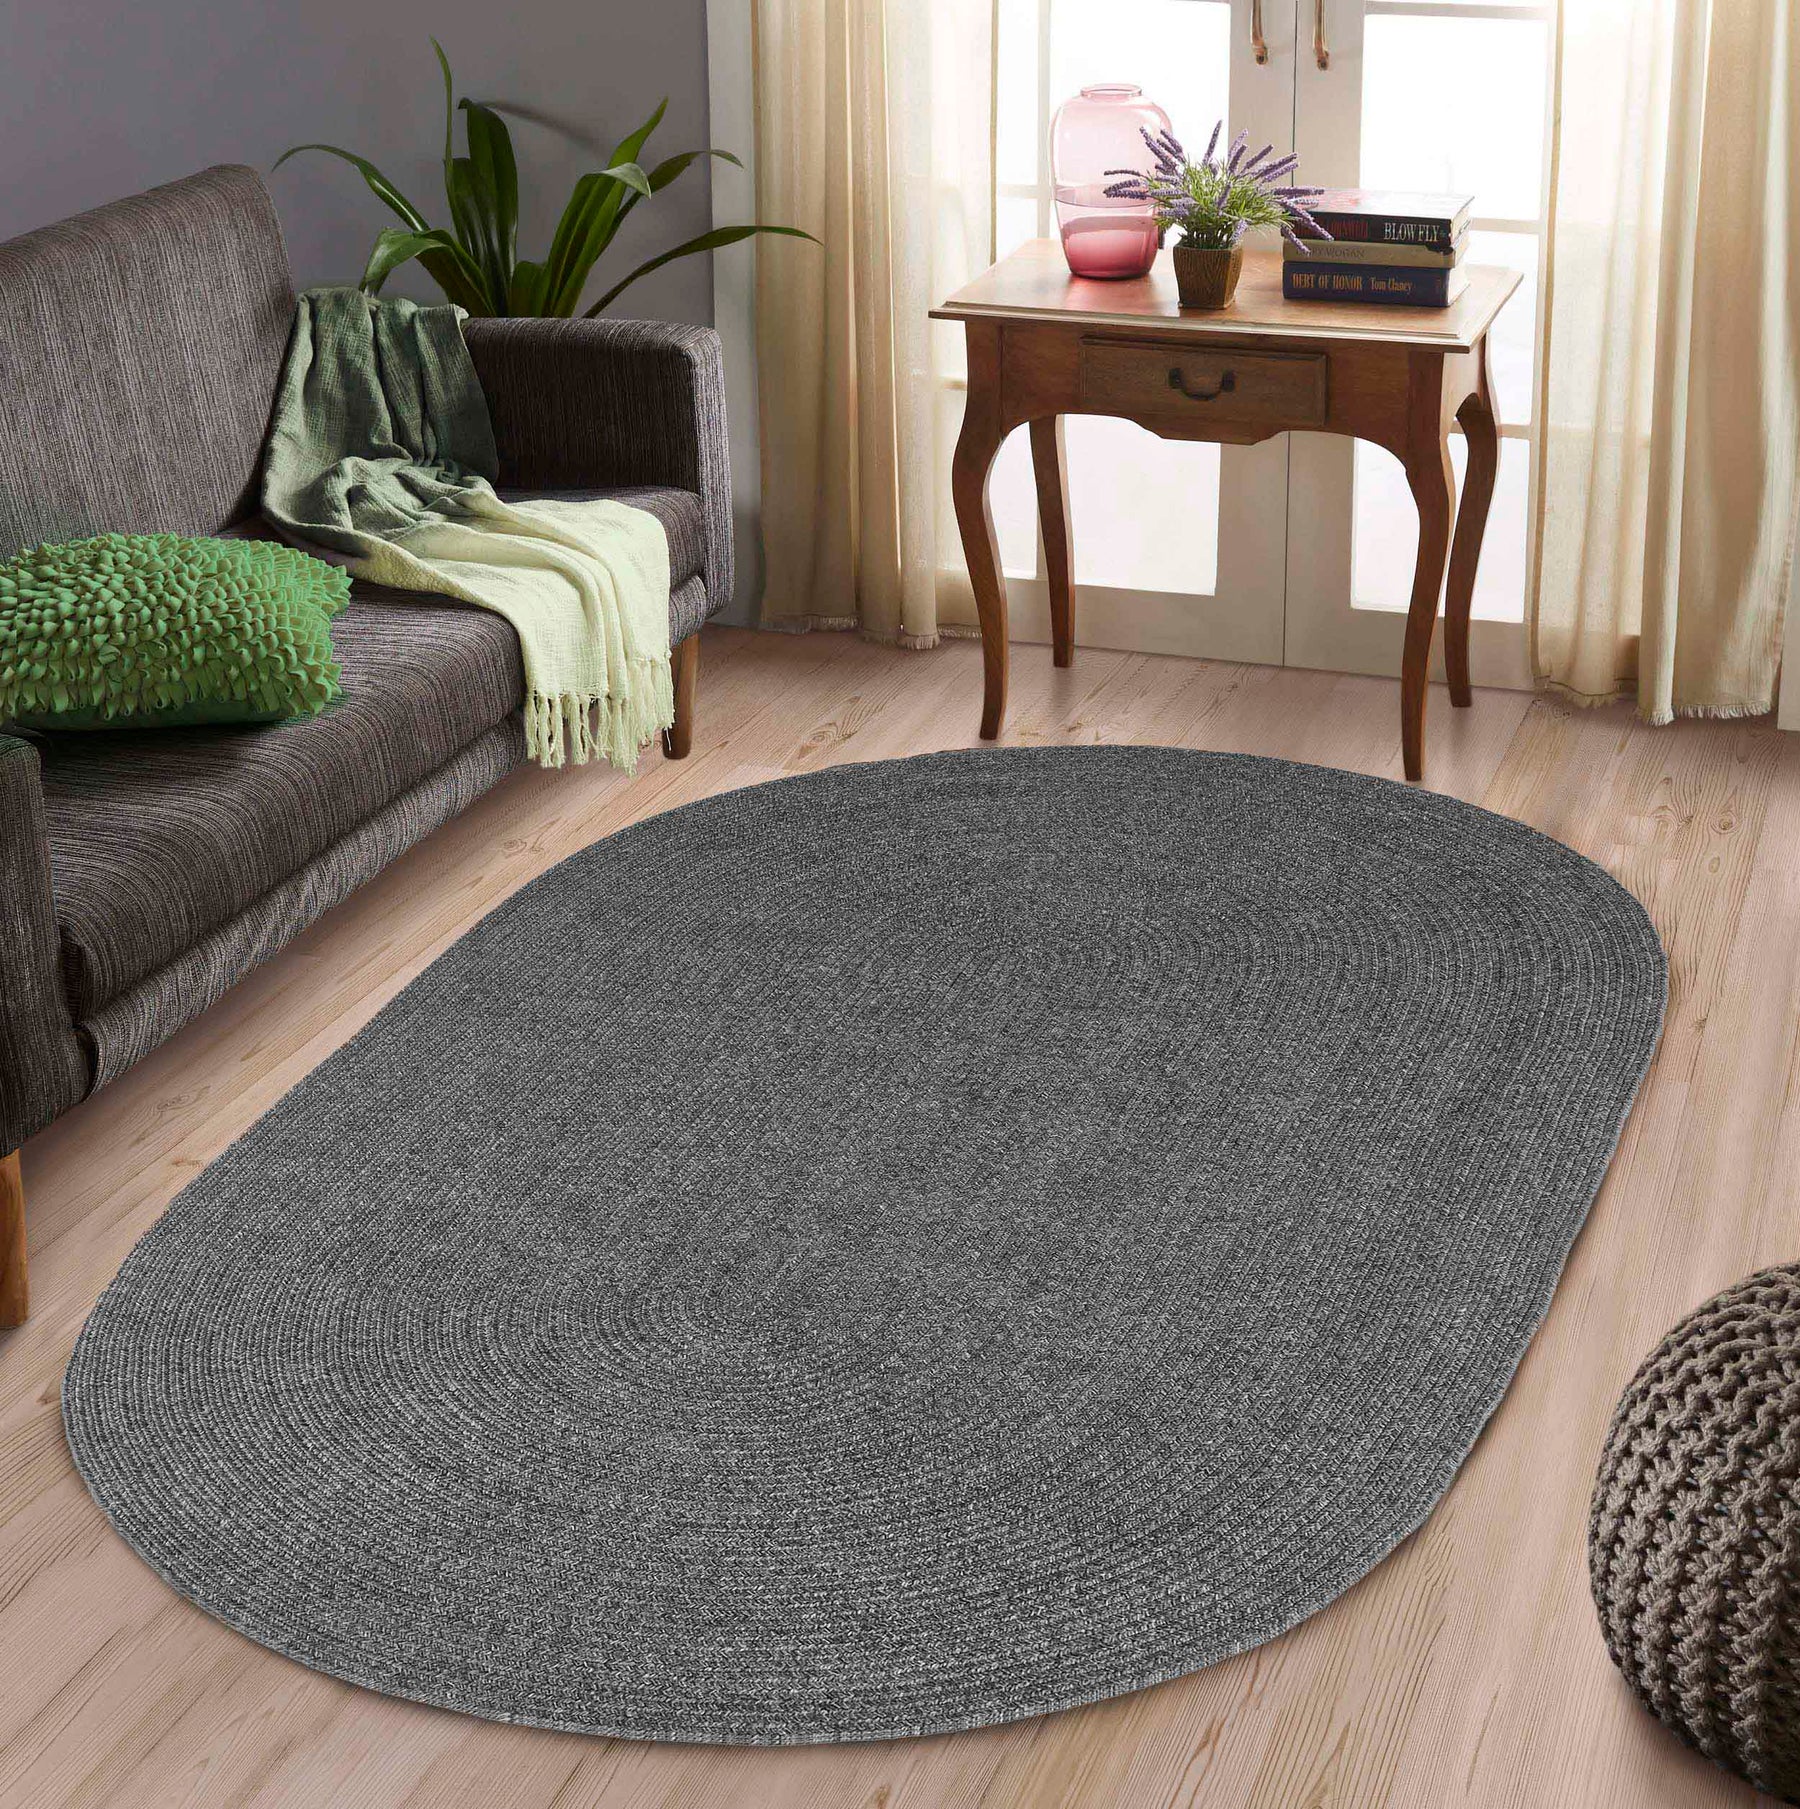 Classic Braided Weave Oval Area Rug Indoor Outdoor Rugs - Charcoal